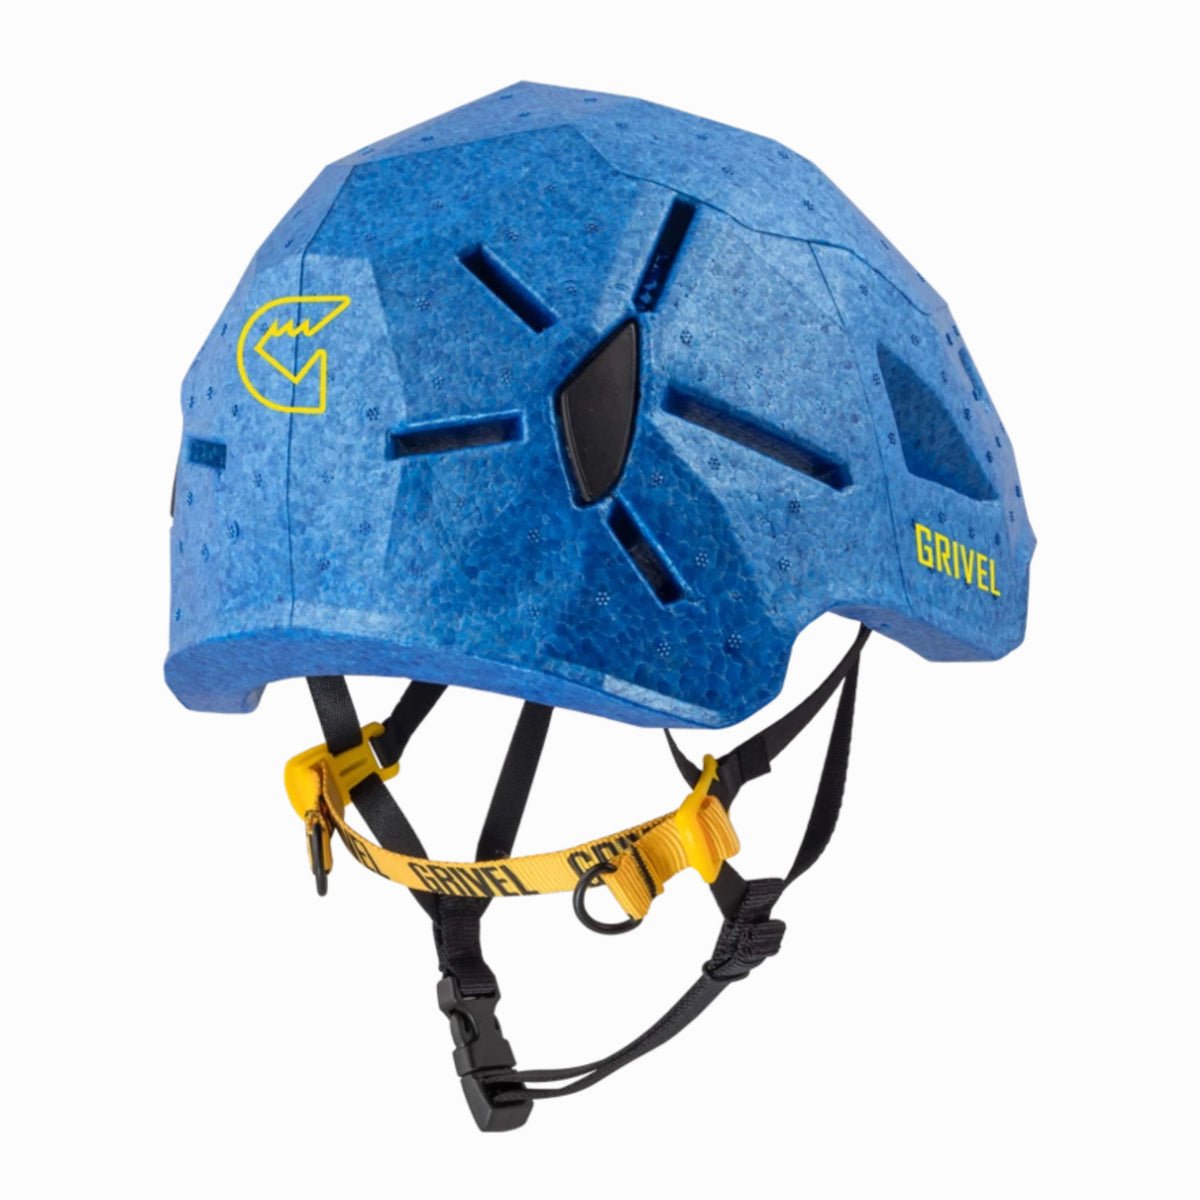 Grivel Duetto climbing and skiing helmet, rear/side view in Blue colour